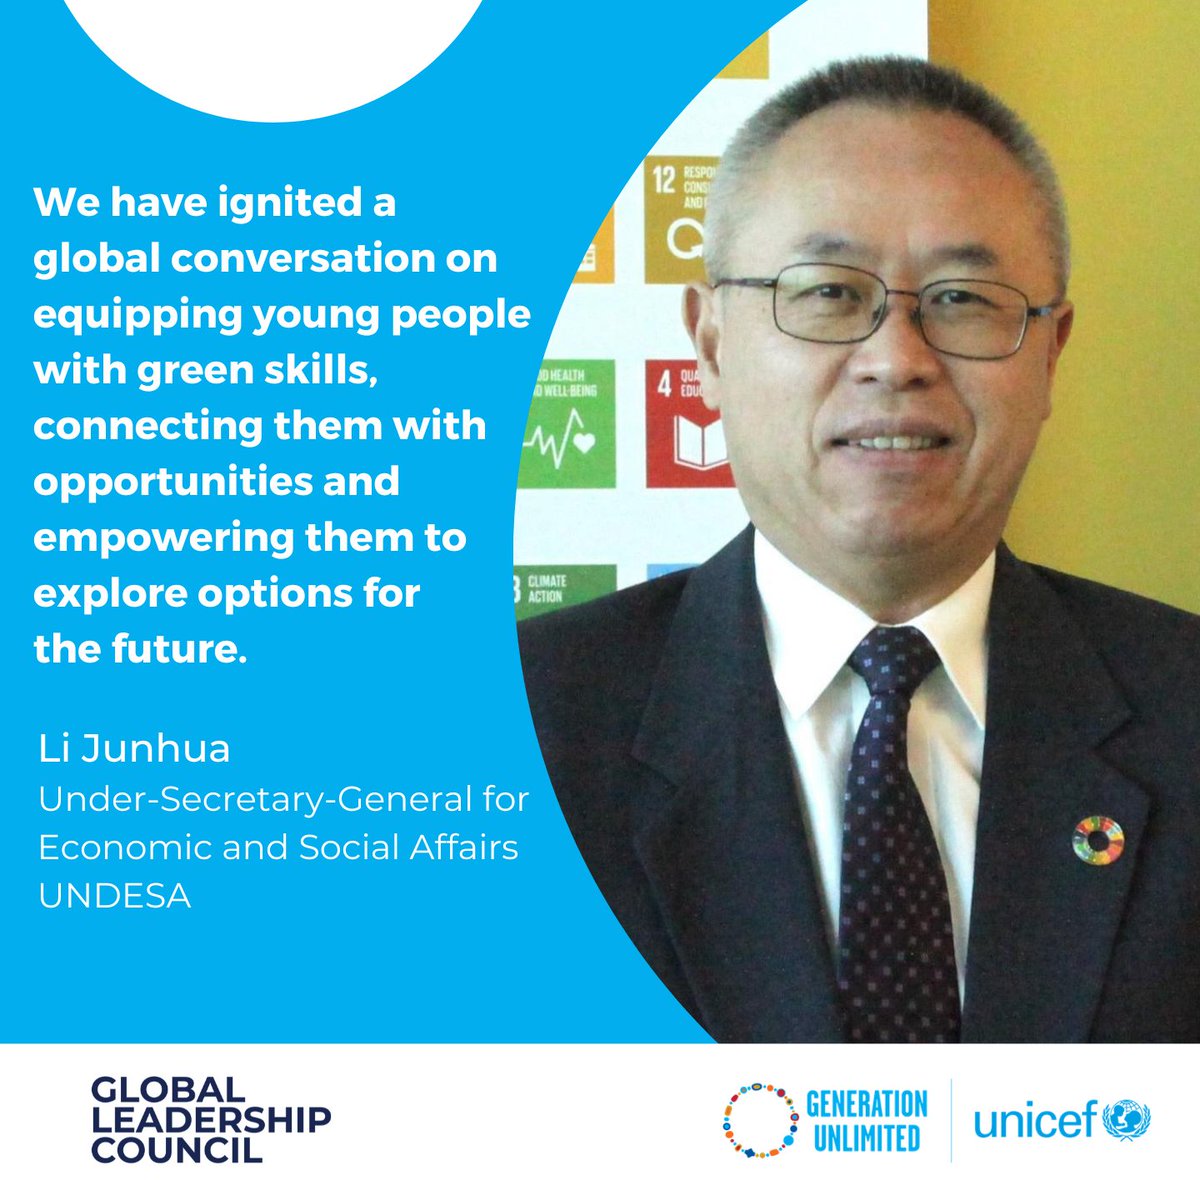 Excited to welcome @UNDESA Under-Secretary-General Li Junhua to the @GenUnlimited_ Global Leadership Council. The partnership between the two organizations is a powerful force in advancing key connections between youth and the #SDGs. generationunlimited.org/global-leaders… #SkillsRightNow